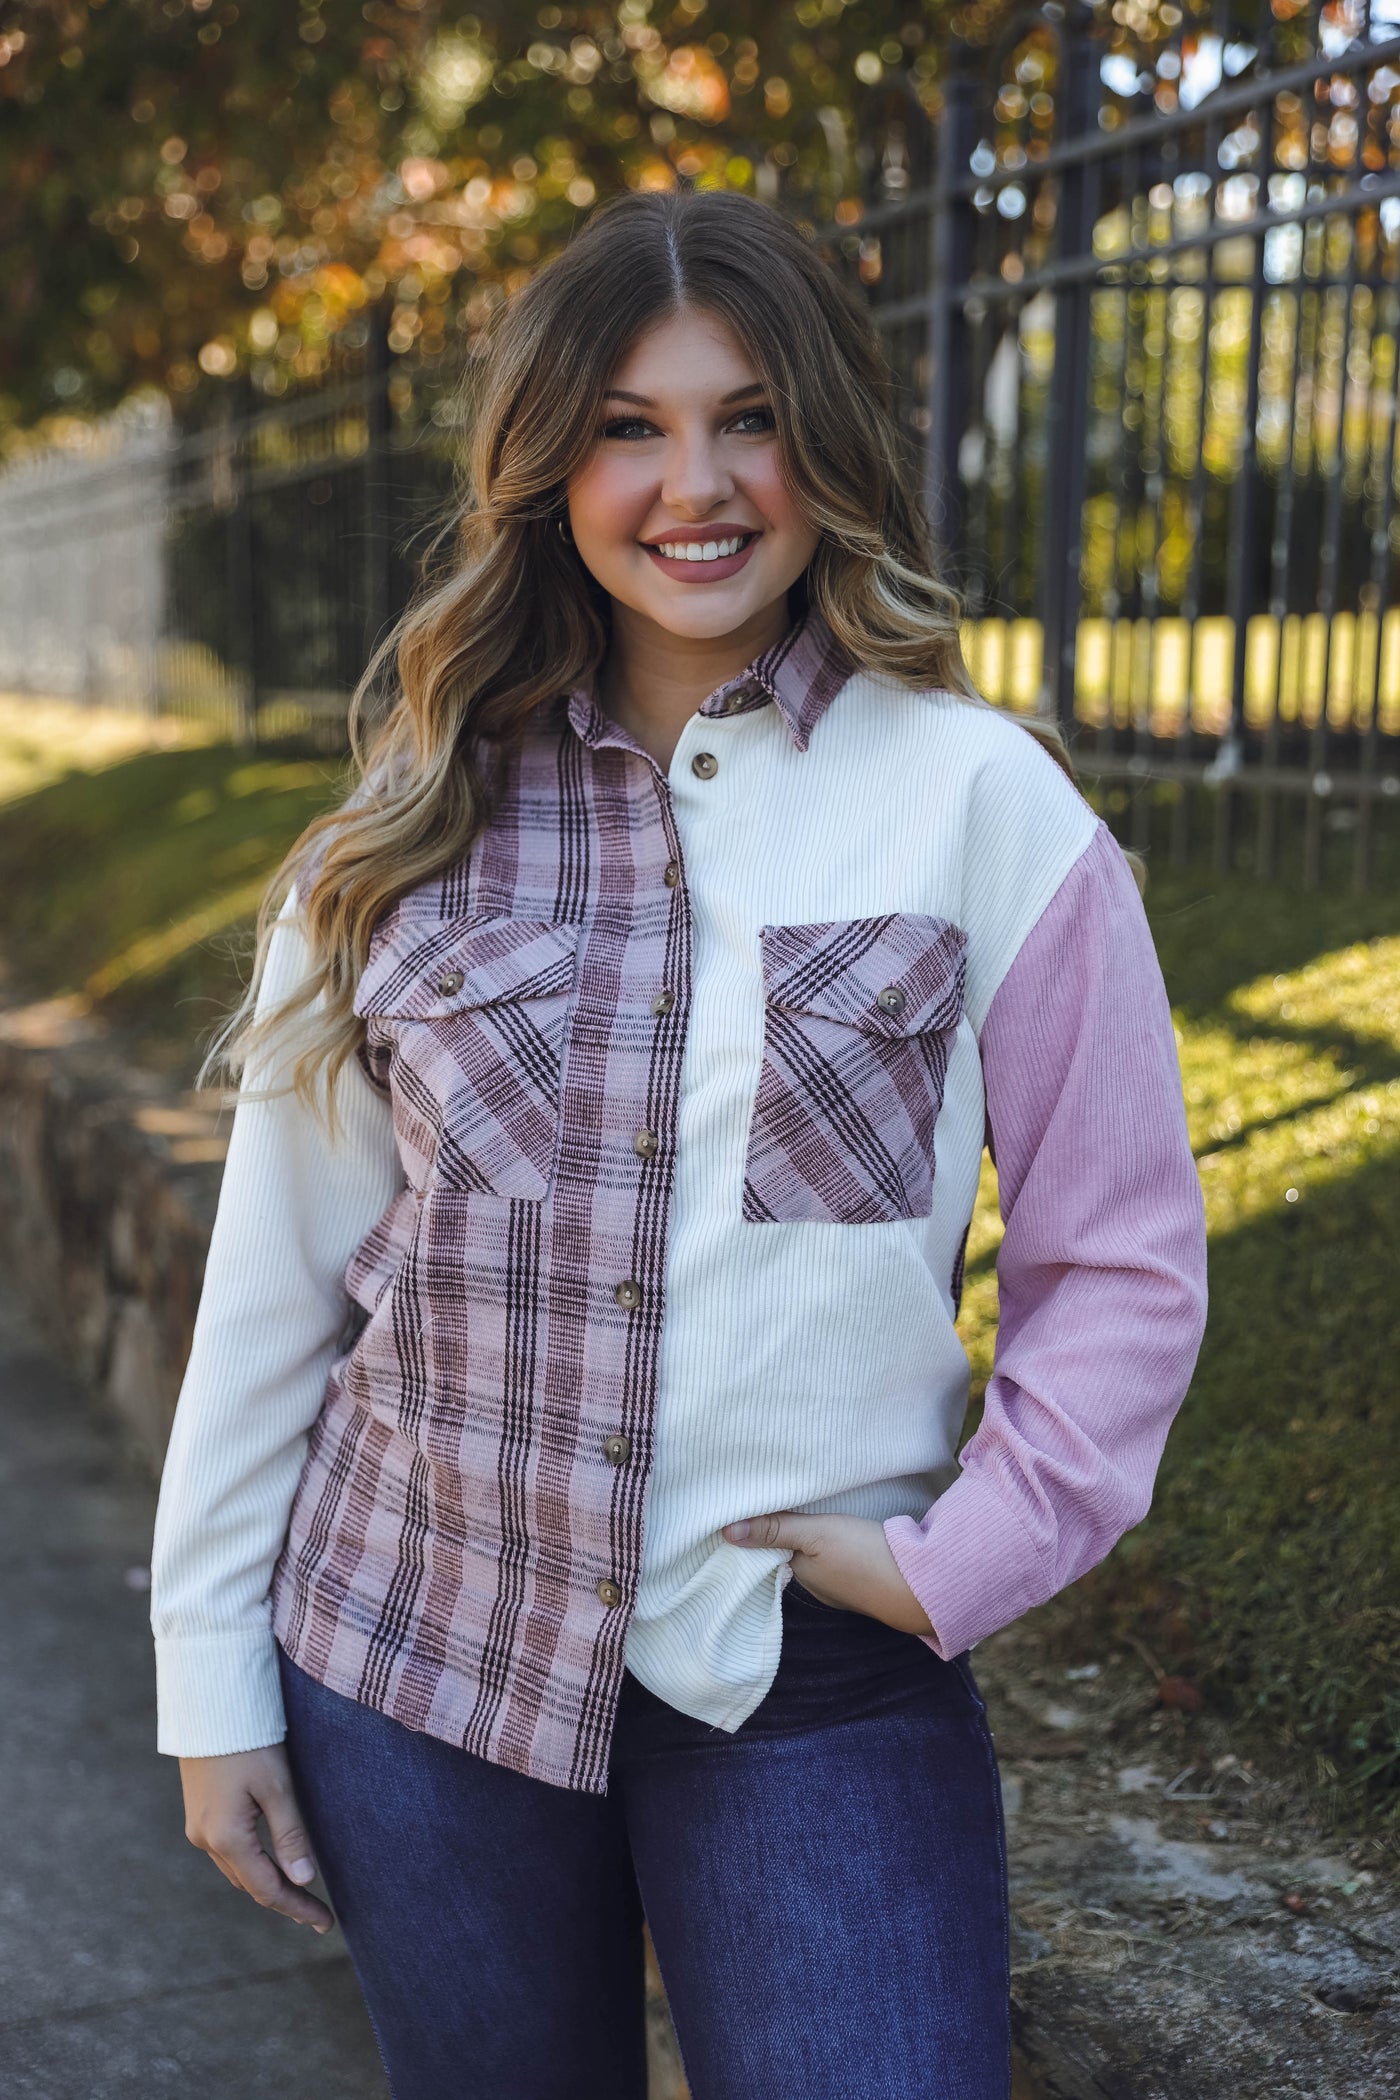 Women's Corduroy Button Down- Pink Plaid Shacket- Women's Pink and White Plaid Top